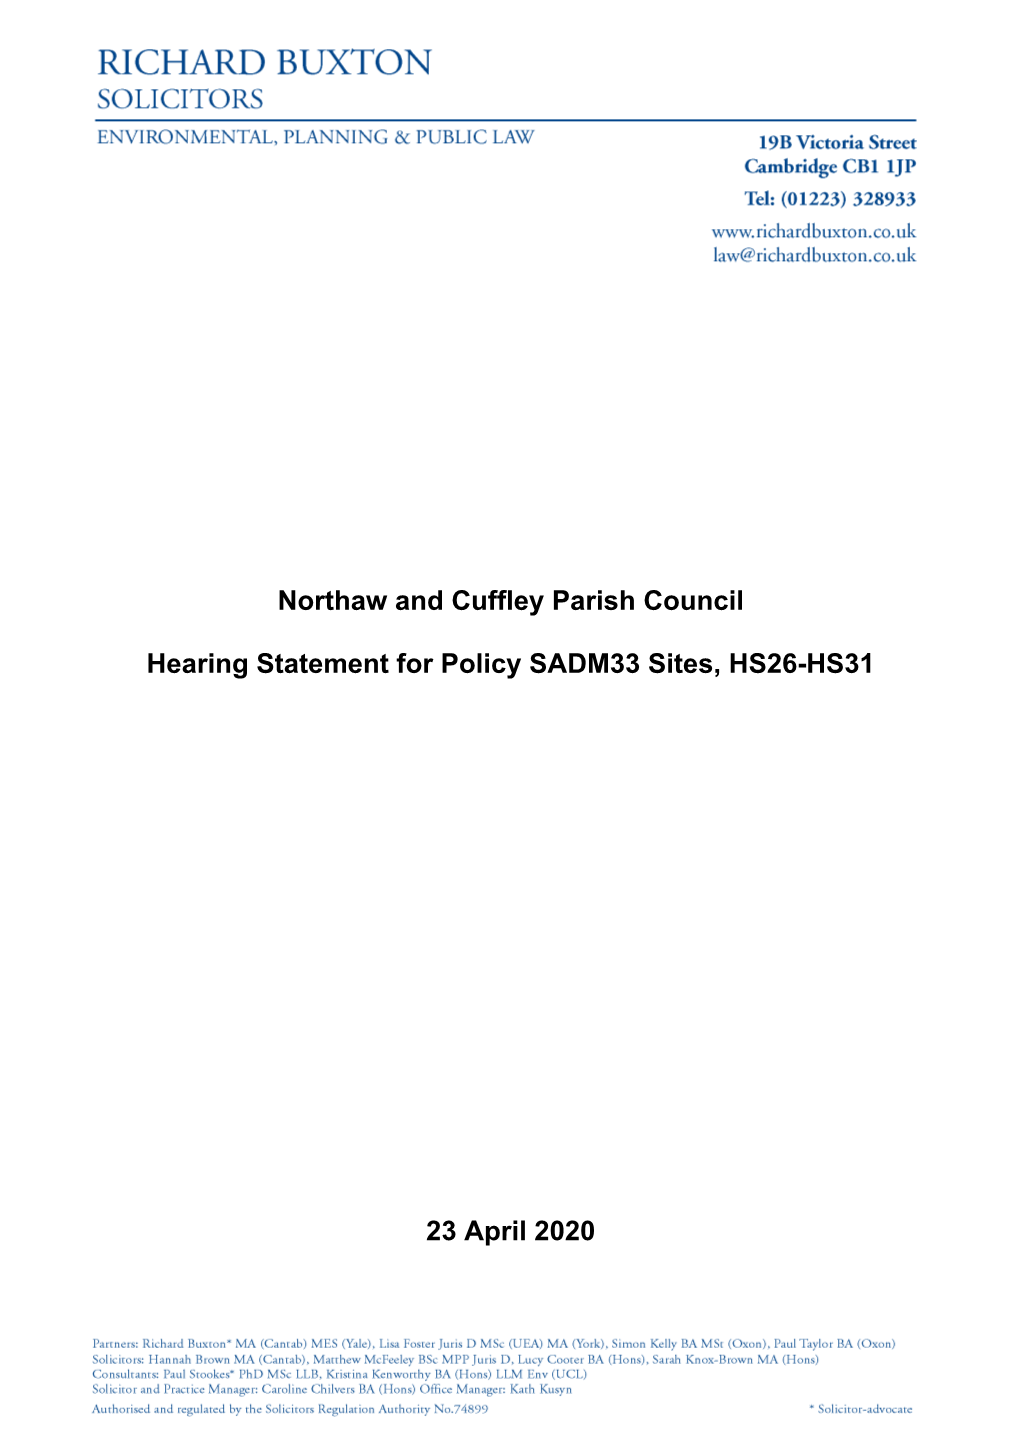 Northaw and Cuffley Parish Council Hearing Statement for Policy